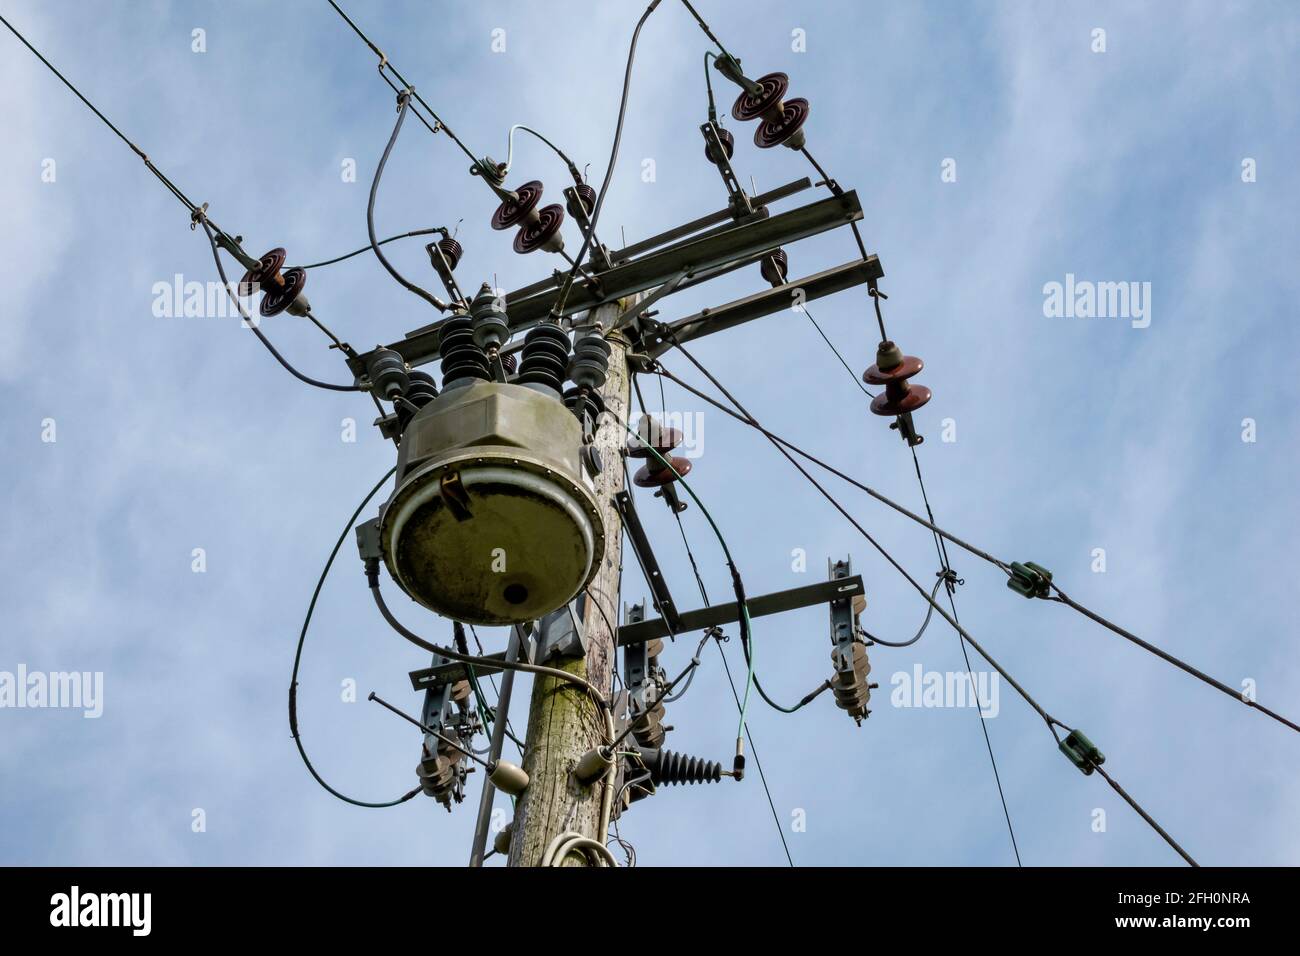 Wooden power pole with electric lines and GVR recloser switchgear Stock Photo